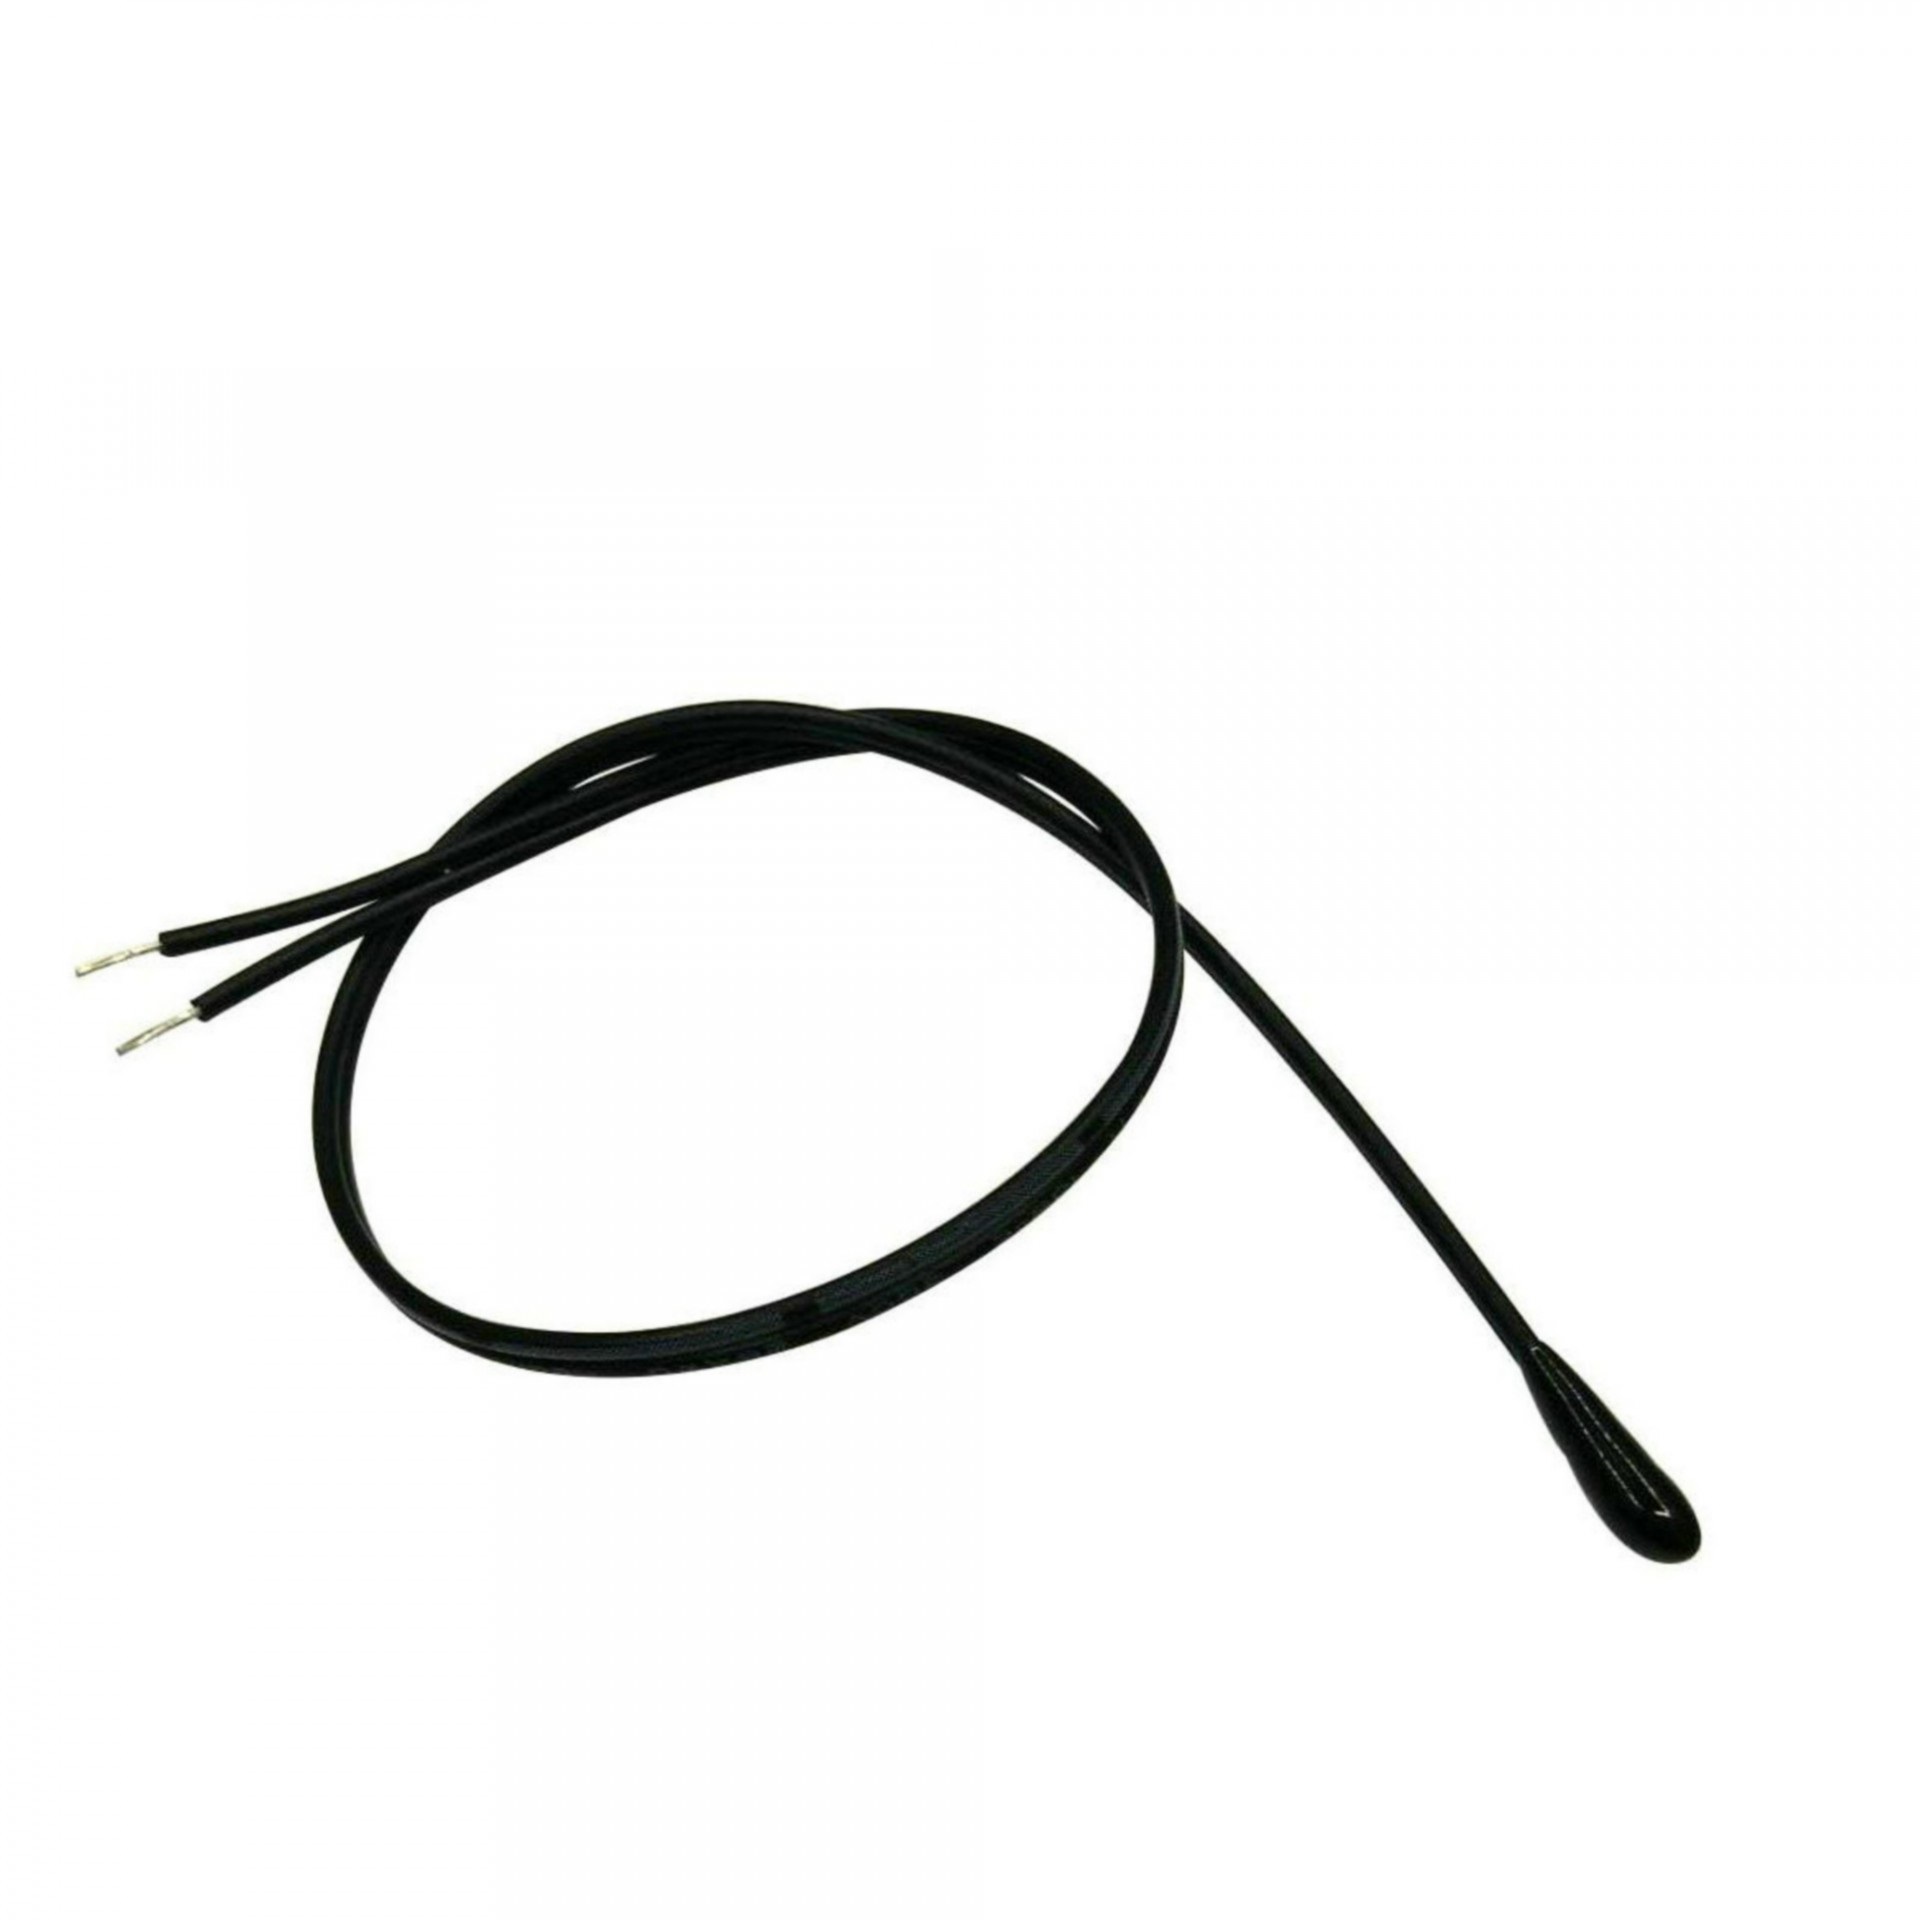 Fast reaction high sensitivity NTC thermistor for battery pack